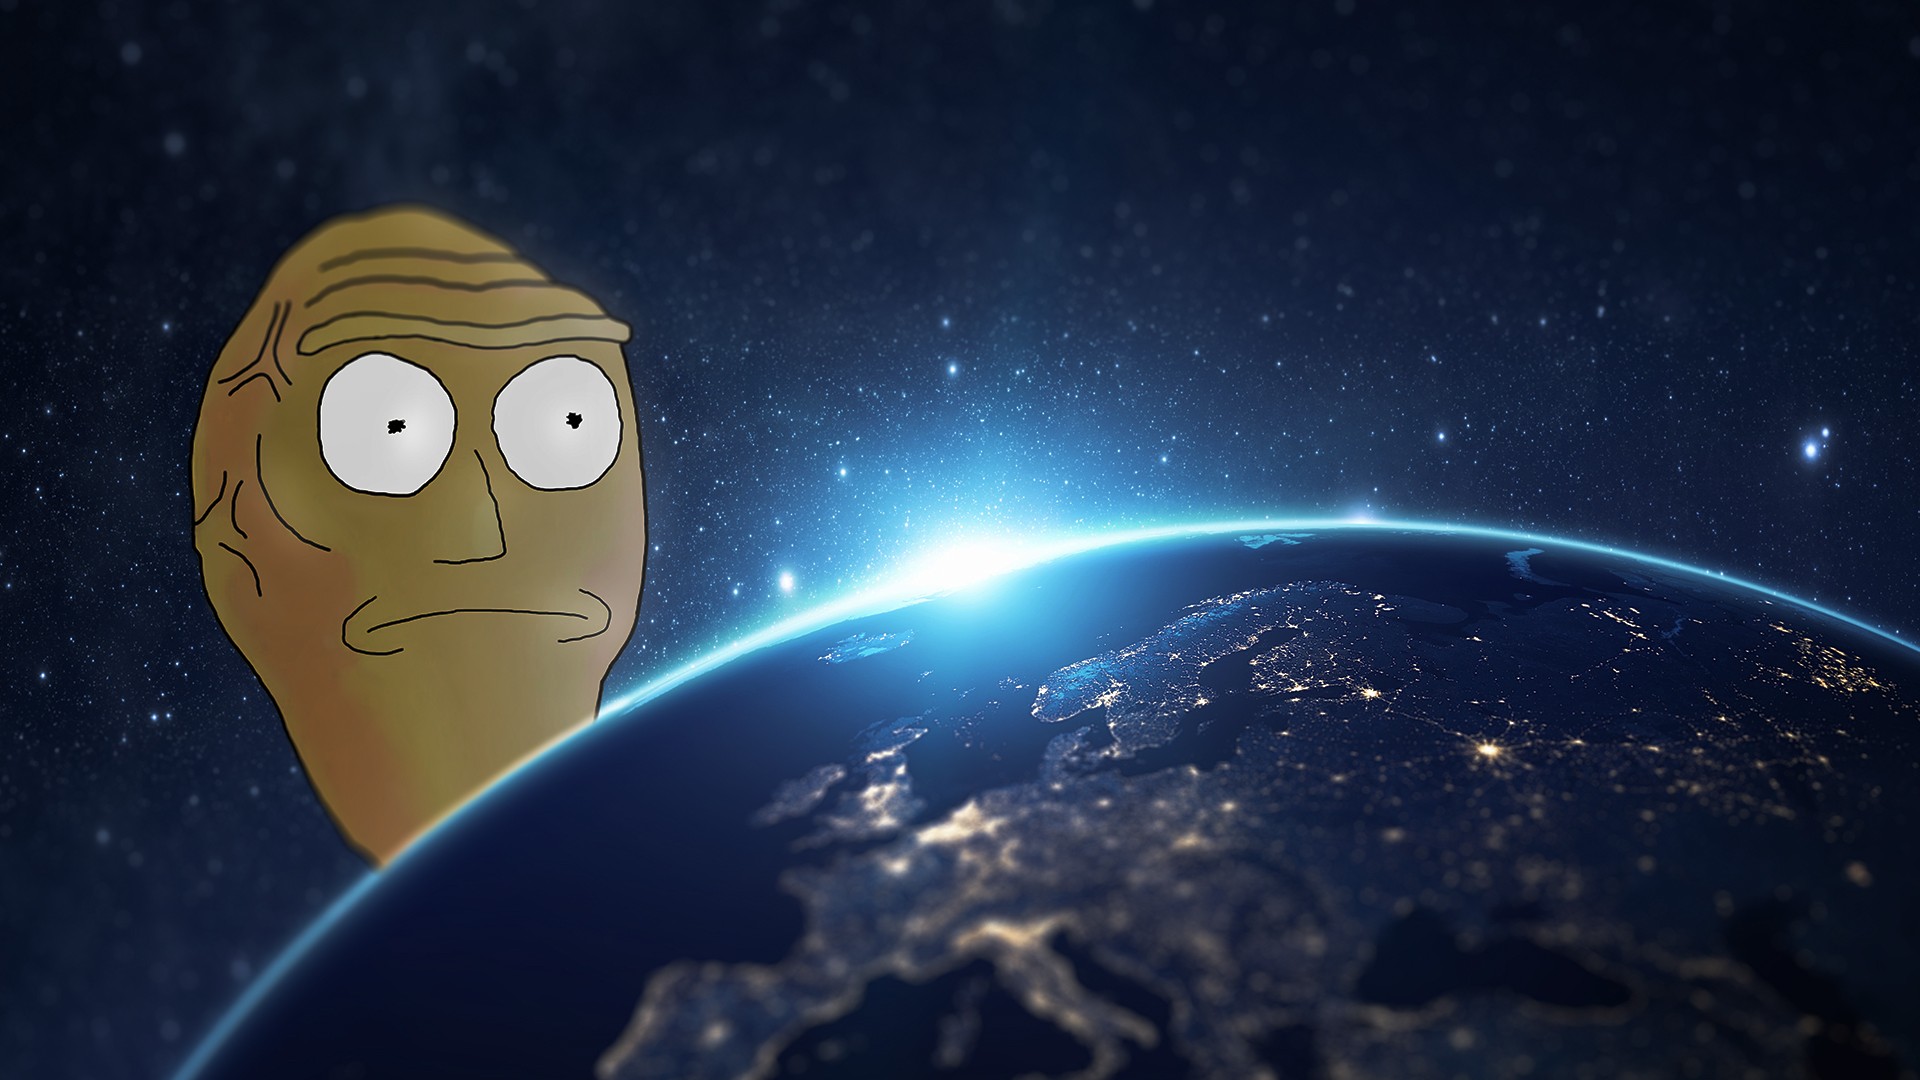 Rick and Morty, cartoon, Earth, floating heads, Show me what you got